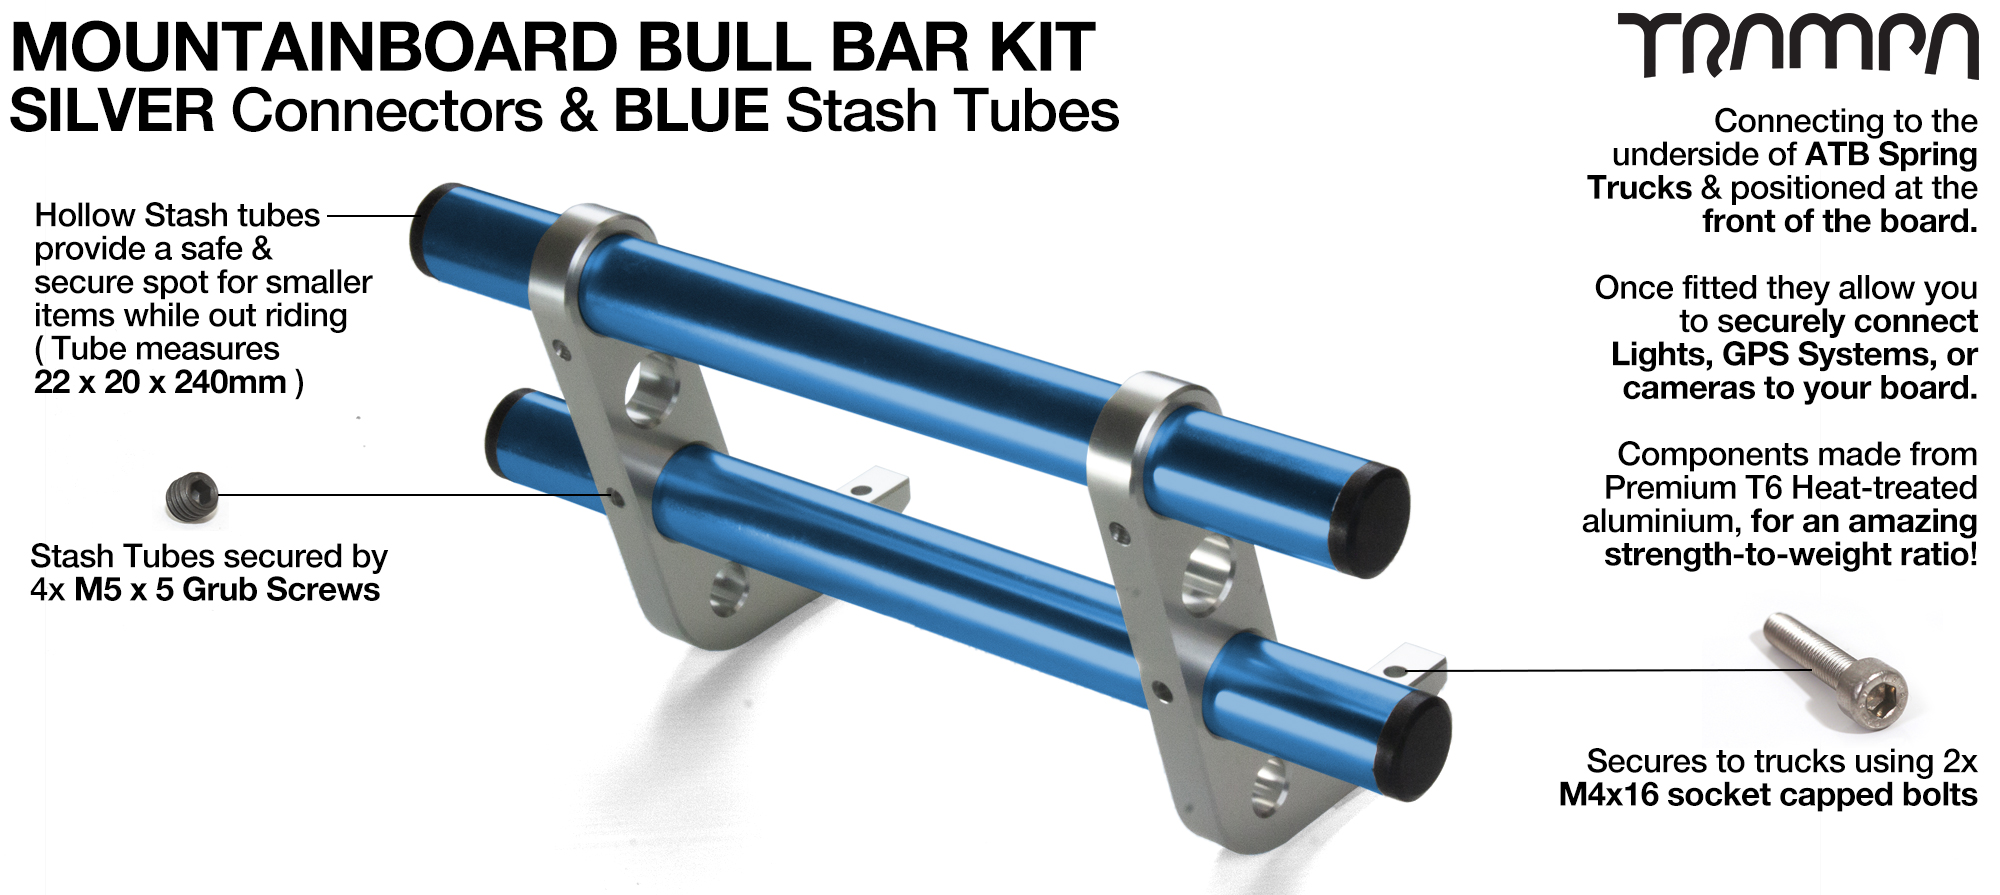 SILVER Uprights & BLUE Crossbar BULL BARS for MOUNTAINBOARDS T6 Heat Treated CNC'd Aluminium Uprights, with Hollow Aluminium Stash Tubes with Rubber end bungs  